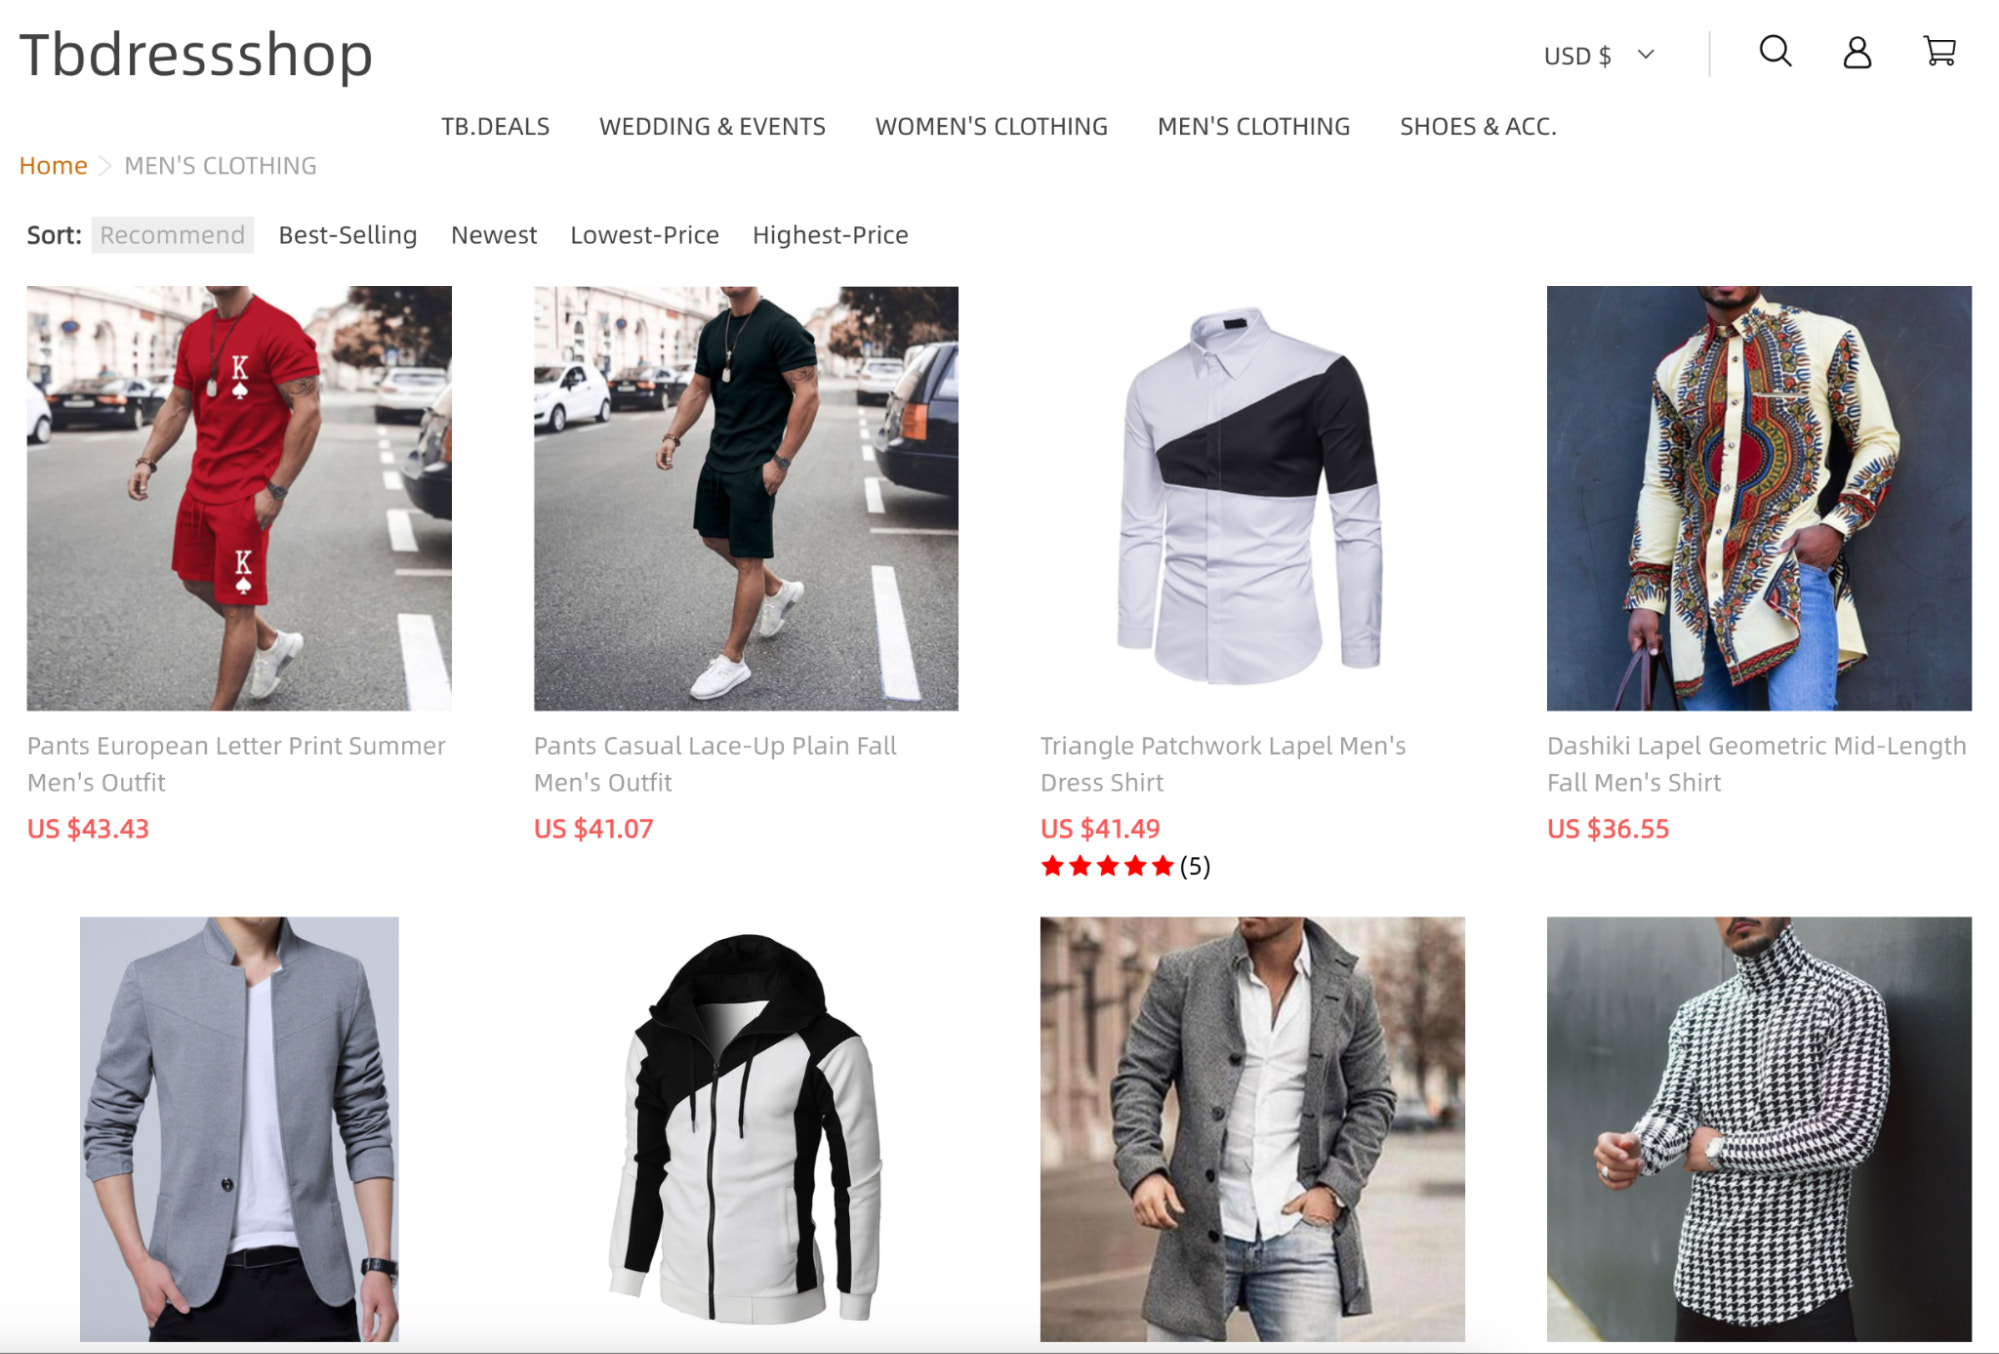 Image of Tbdresshop website showing men’s clothes at cheap prices